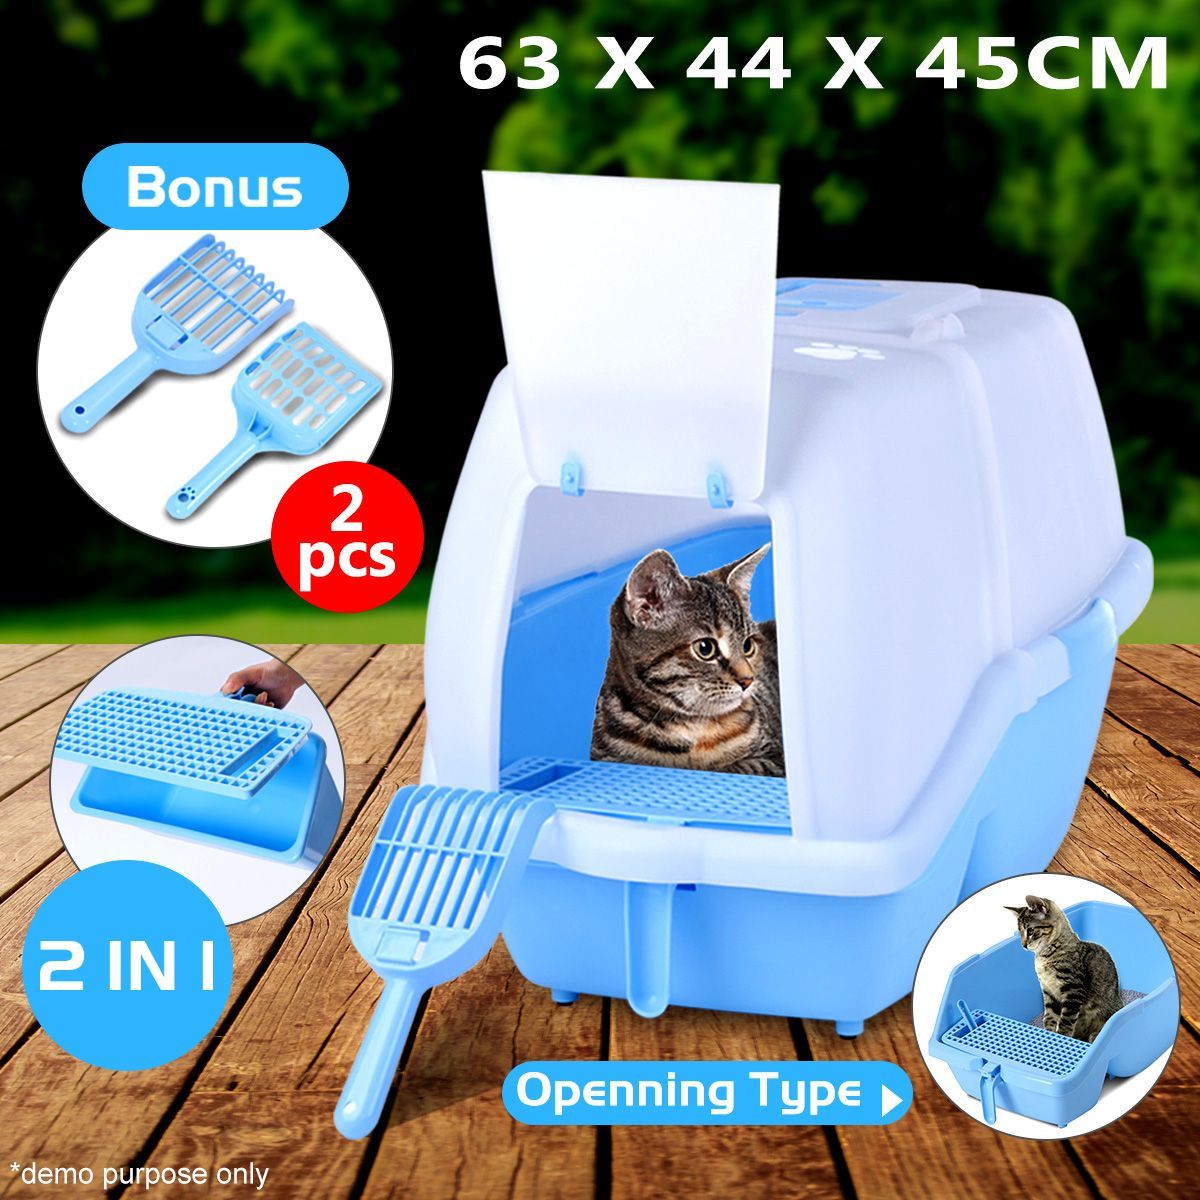 2 in 1 Large Hooded Cat Litter Tray Box Enclosed Kitty Toilet with Flap Door